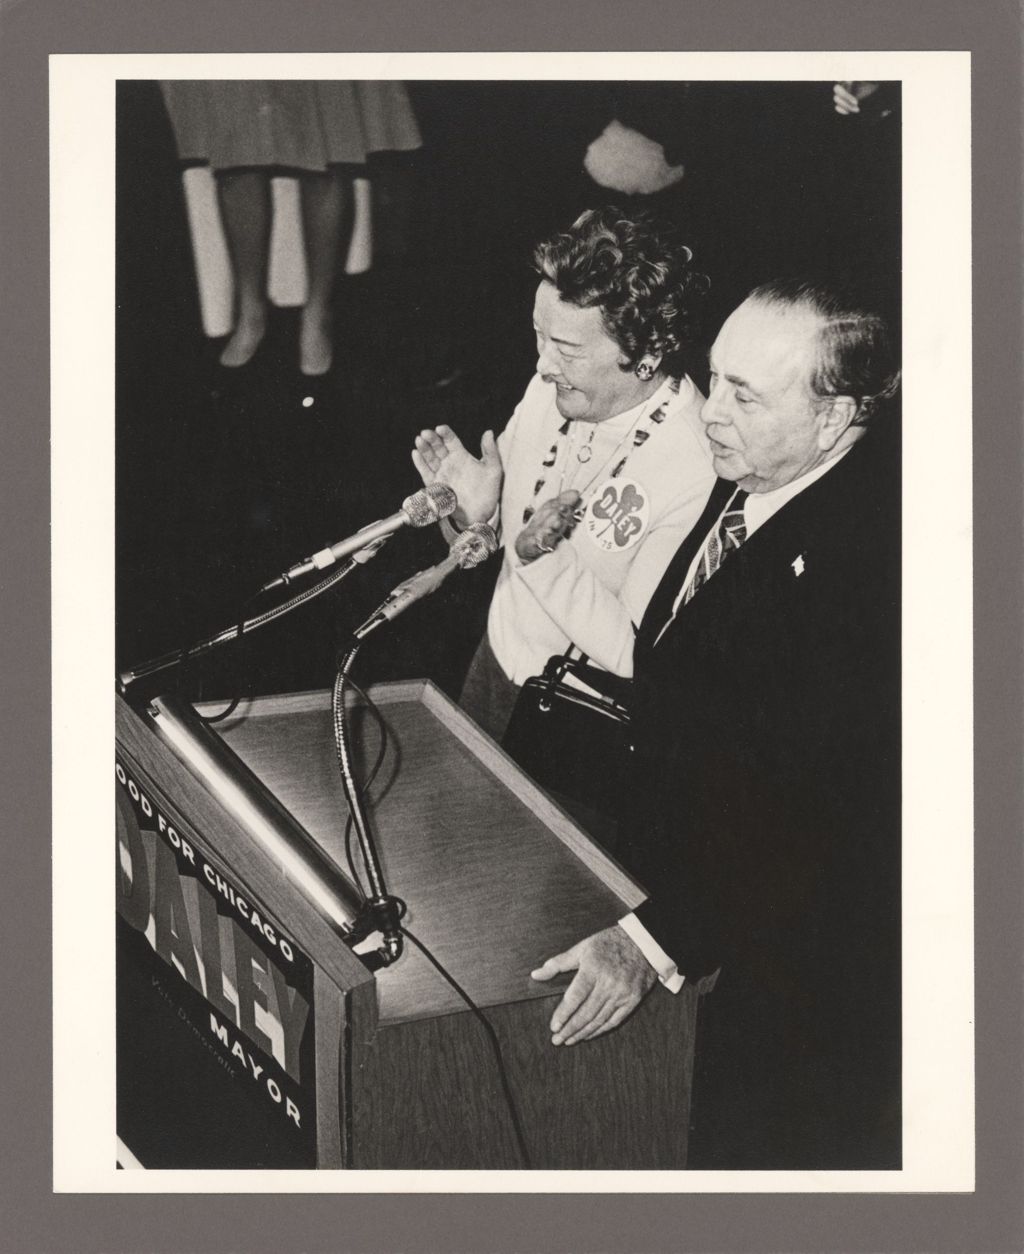 Miniature of Richard J. Daley and Eleanor Daley on election night